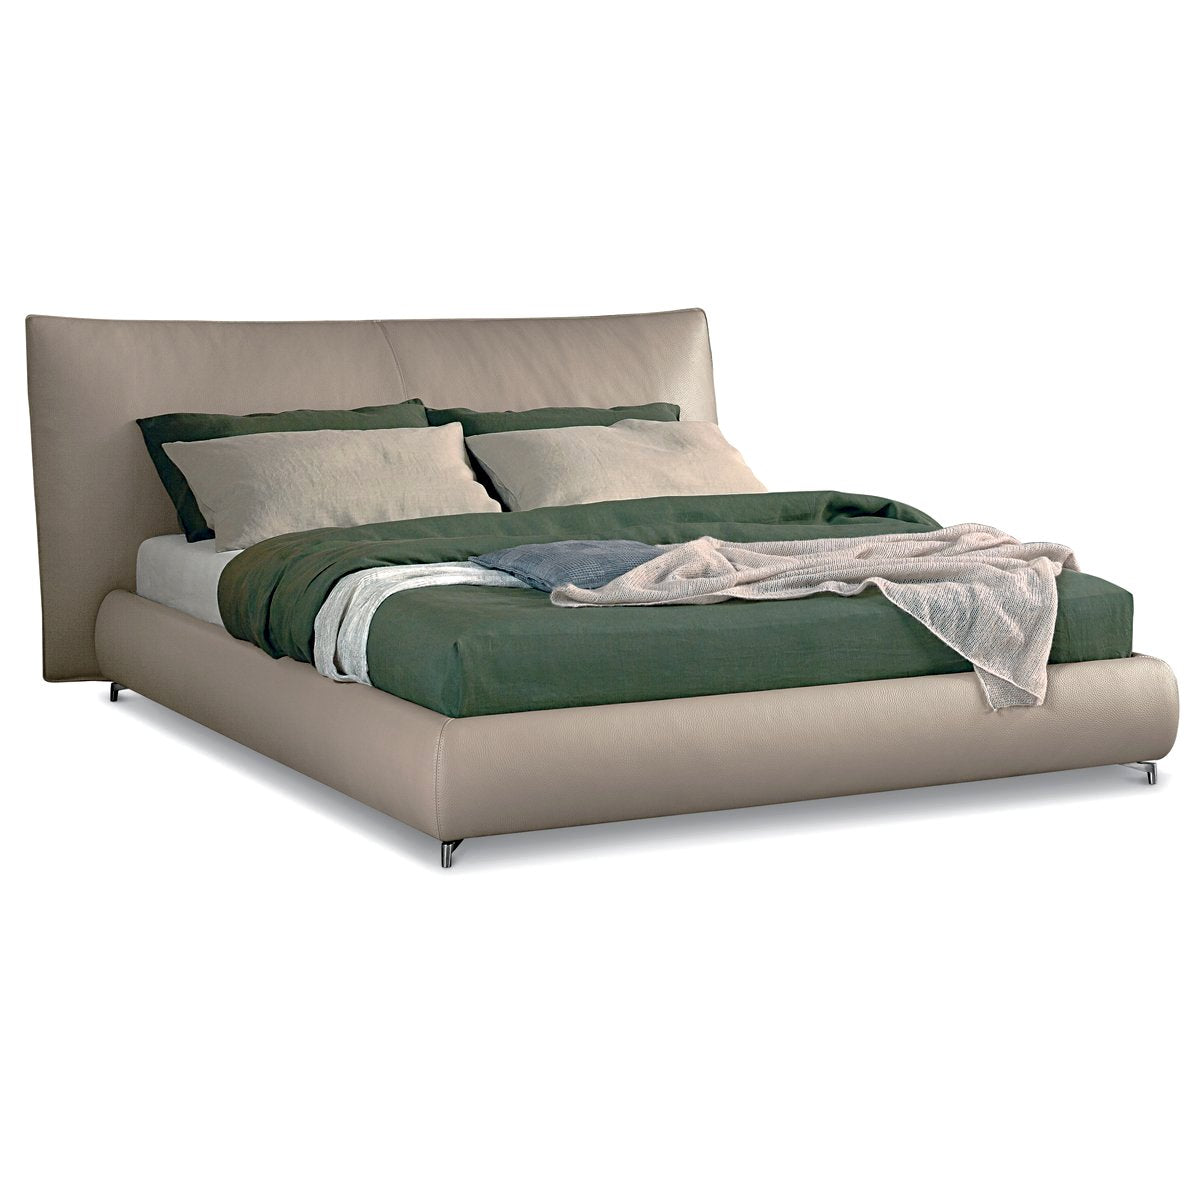 Suite Leather Bed | Urban Avenue